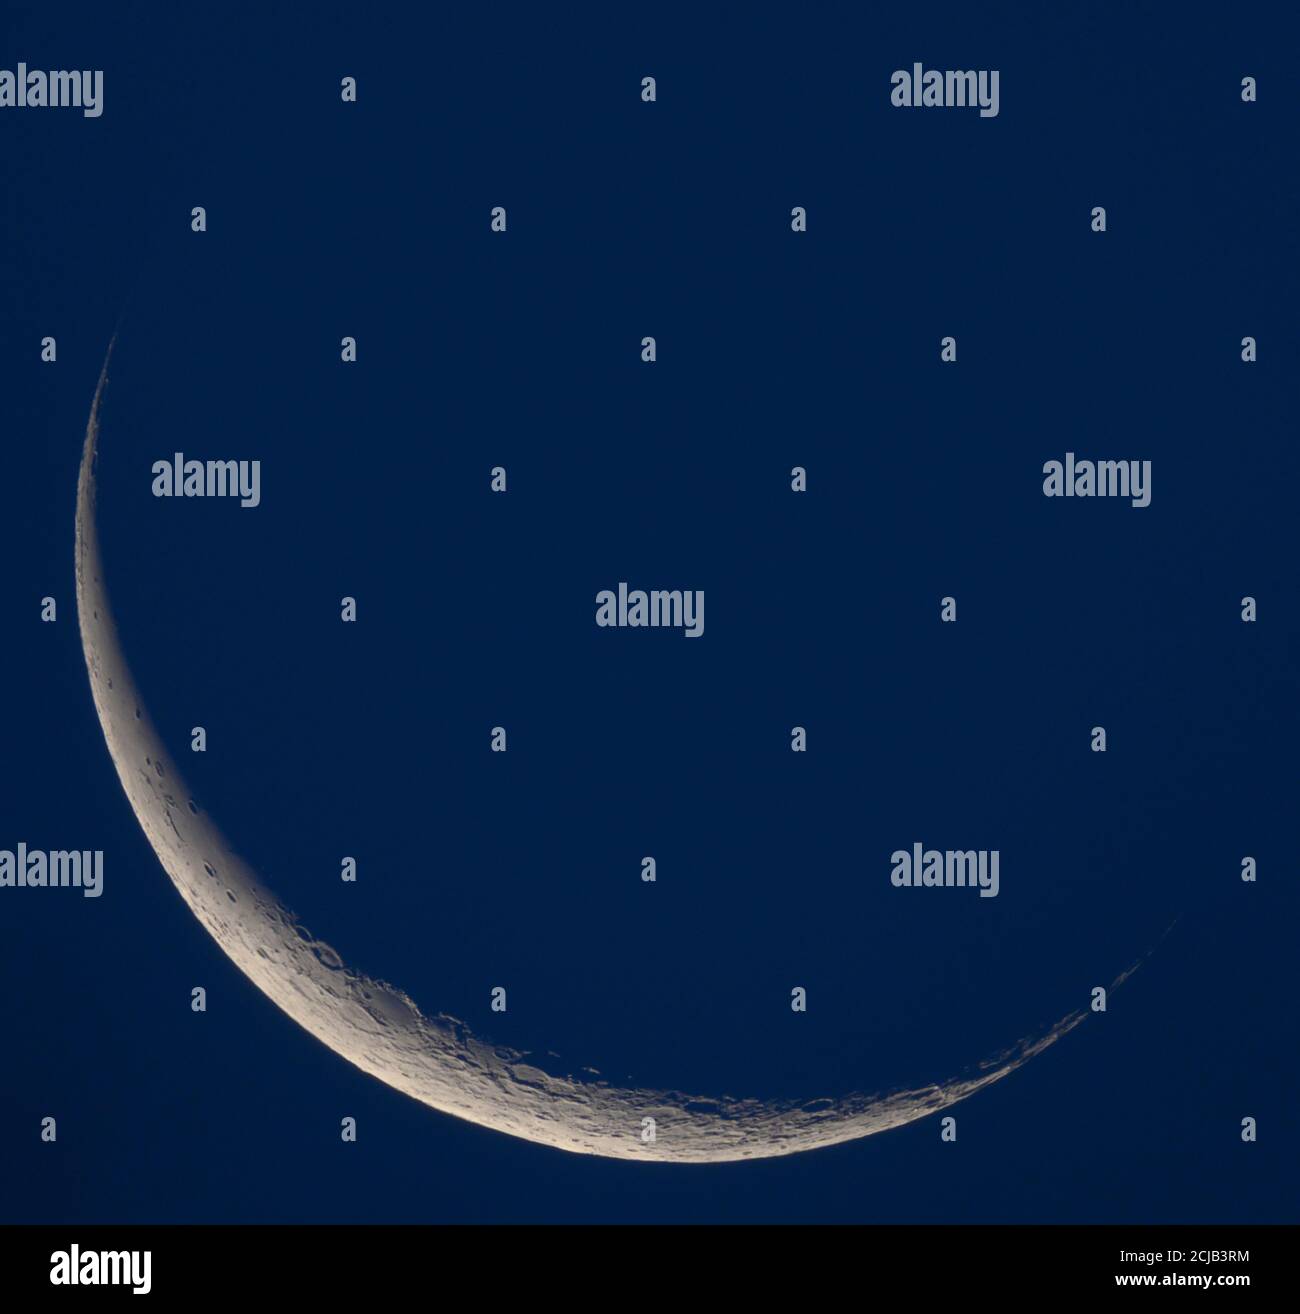 London, UK. 15 September 2020. 7% waning crescent Moon in pre-dawn clear sky above London. Credit: Malcolm Park/Alamy Live News.  Stock Photo